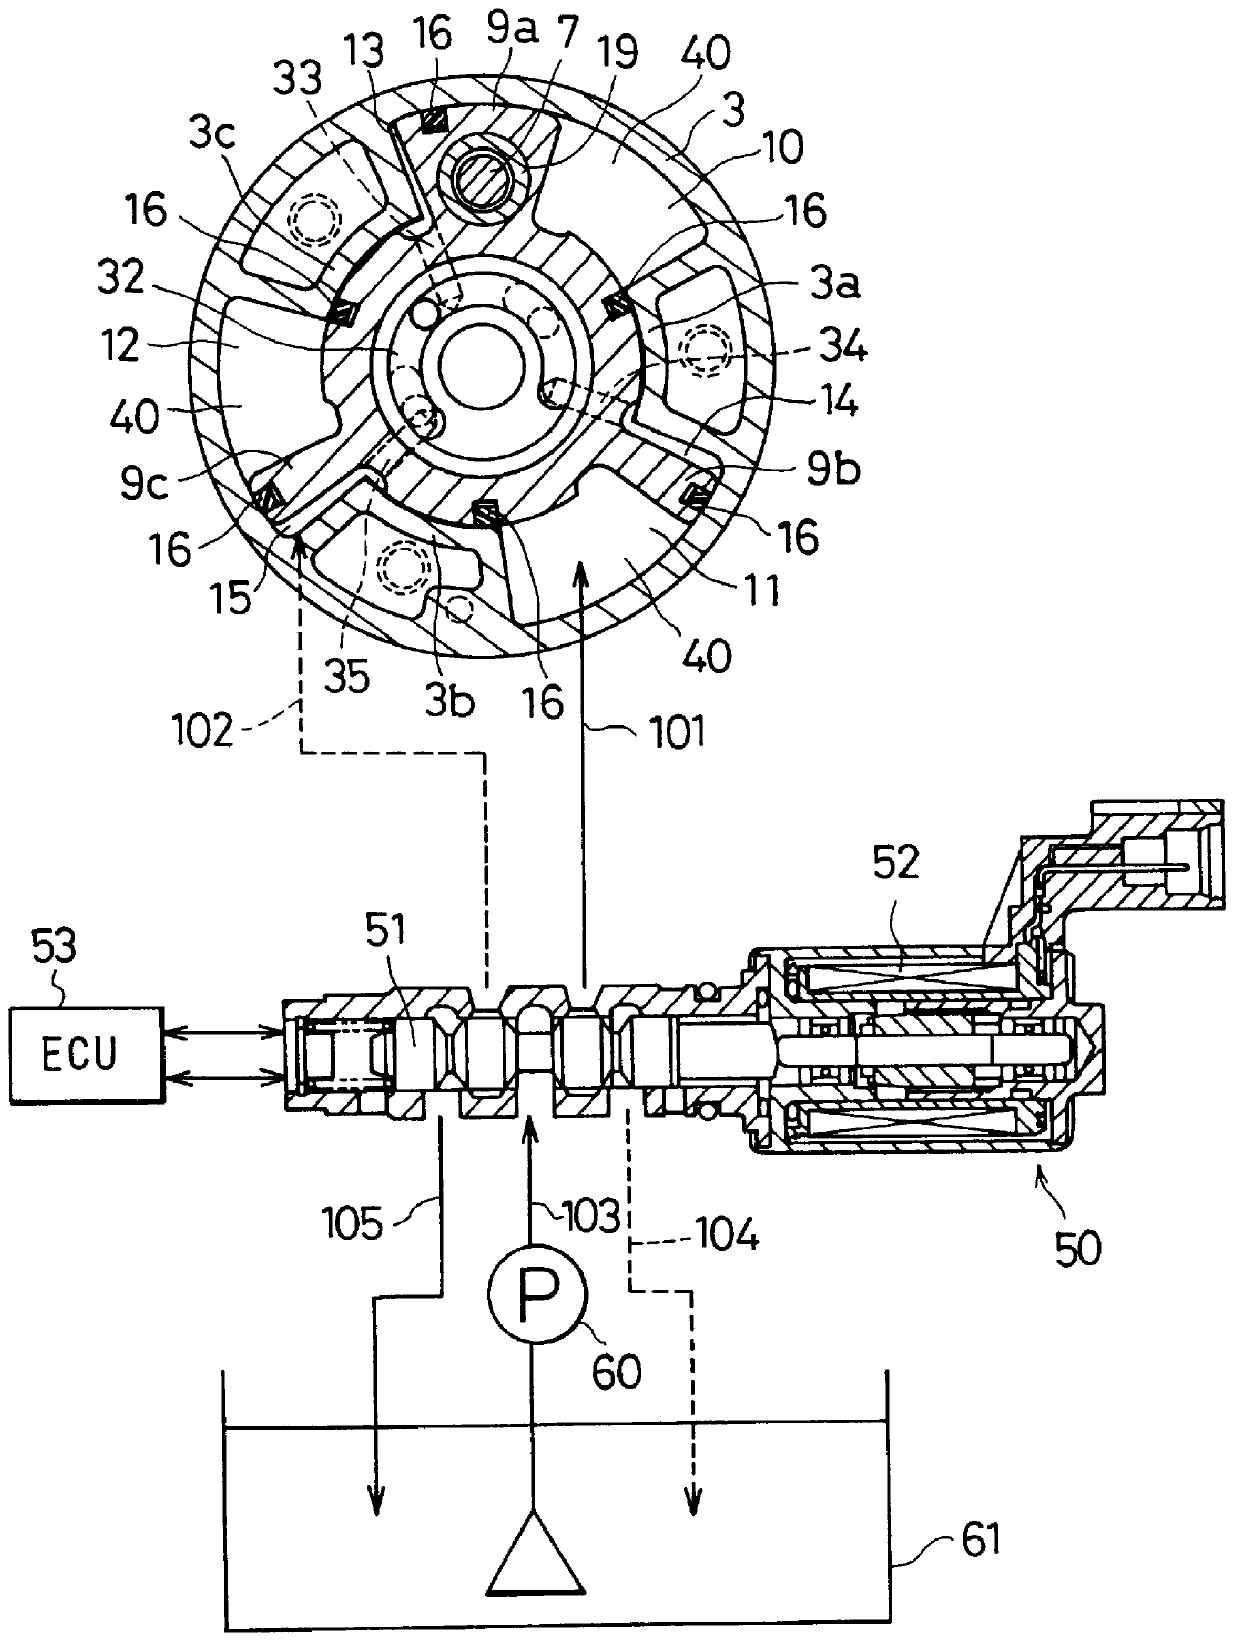 Valve timing adjusting apparatus for internal combustion engines